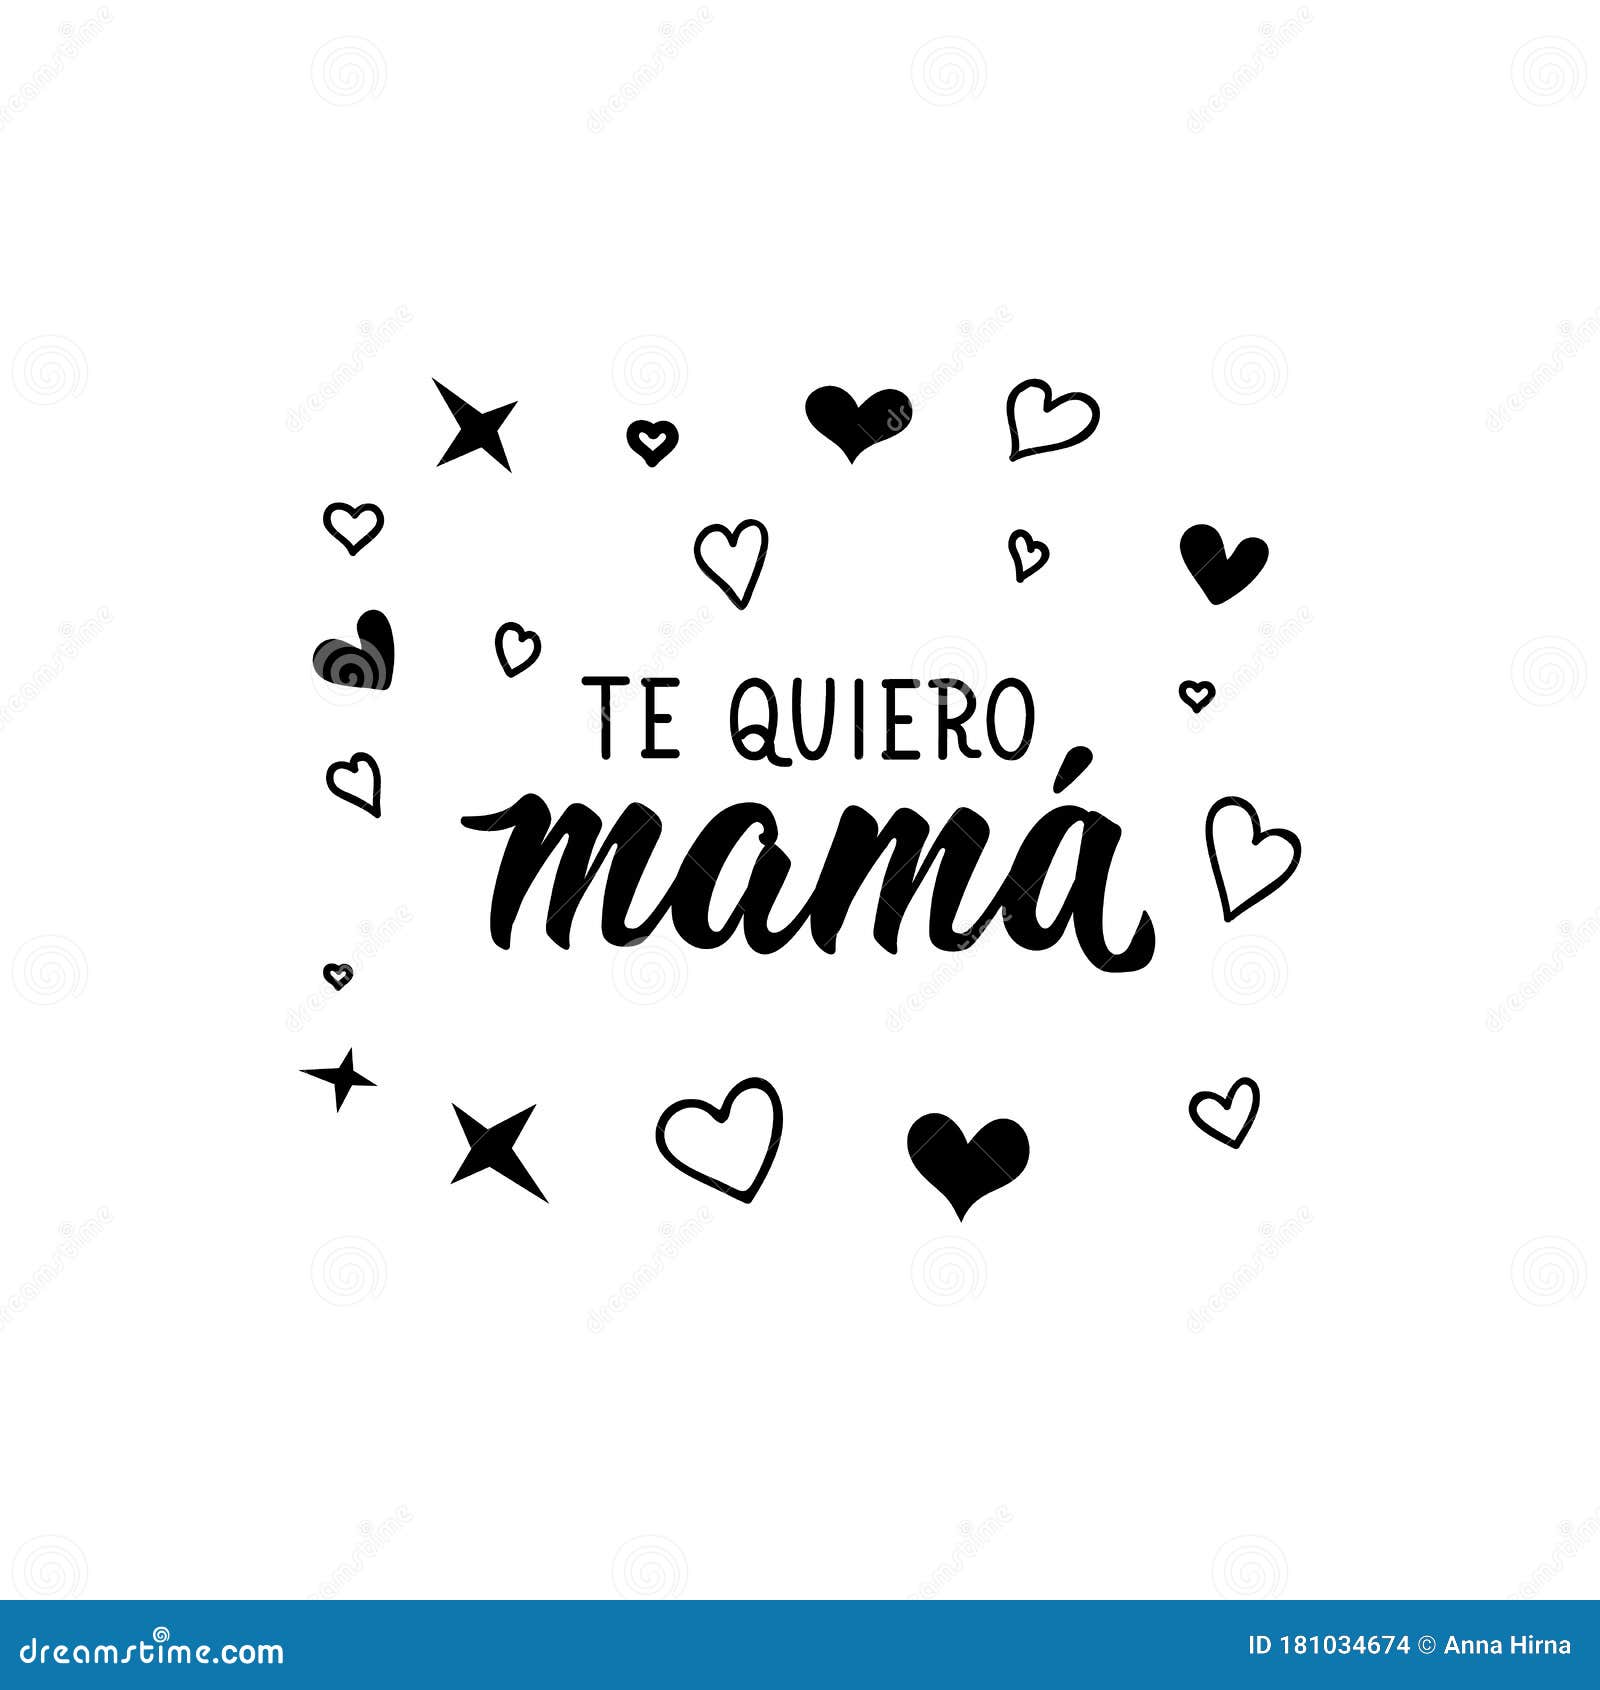 Top 91+ Images how do you say love you mom in spanish Completed